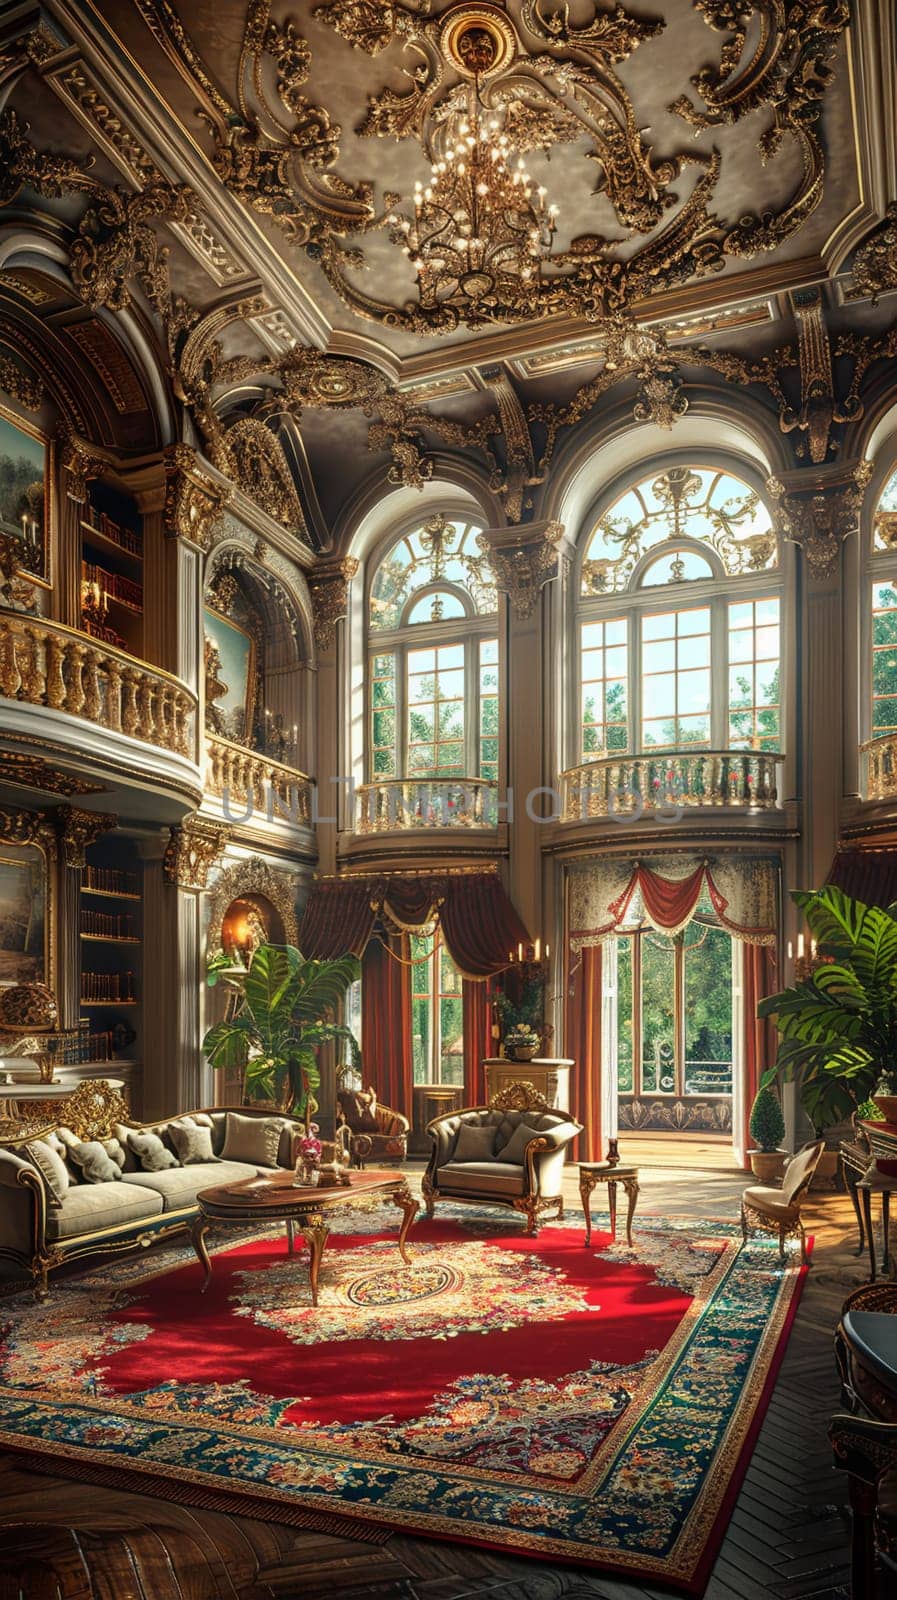 Ornate Victorian drawing room with rich textures and period furniture3D render.